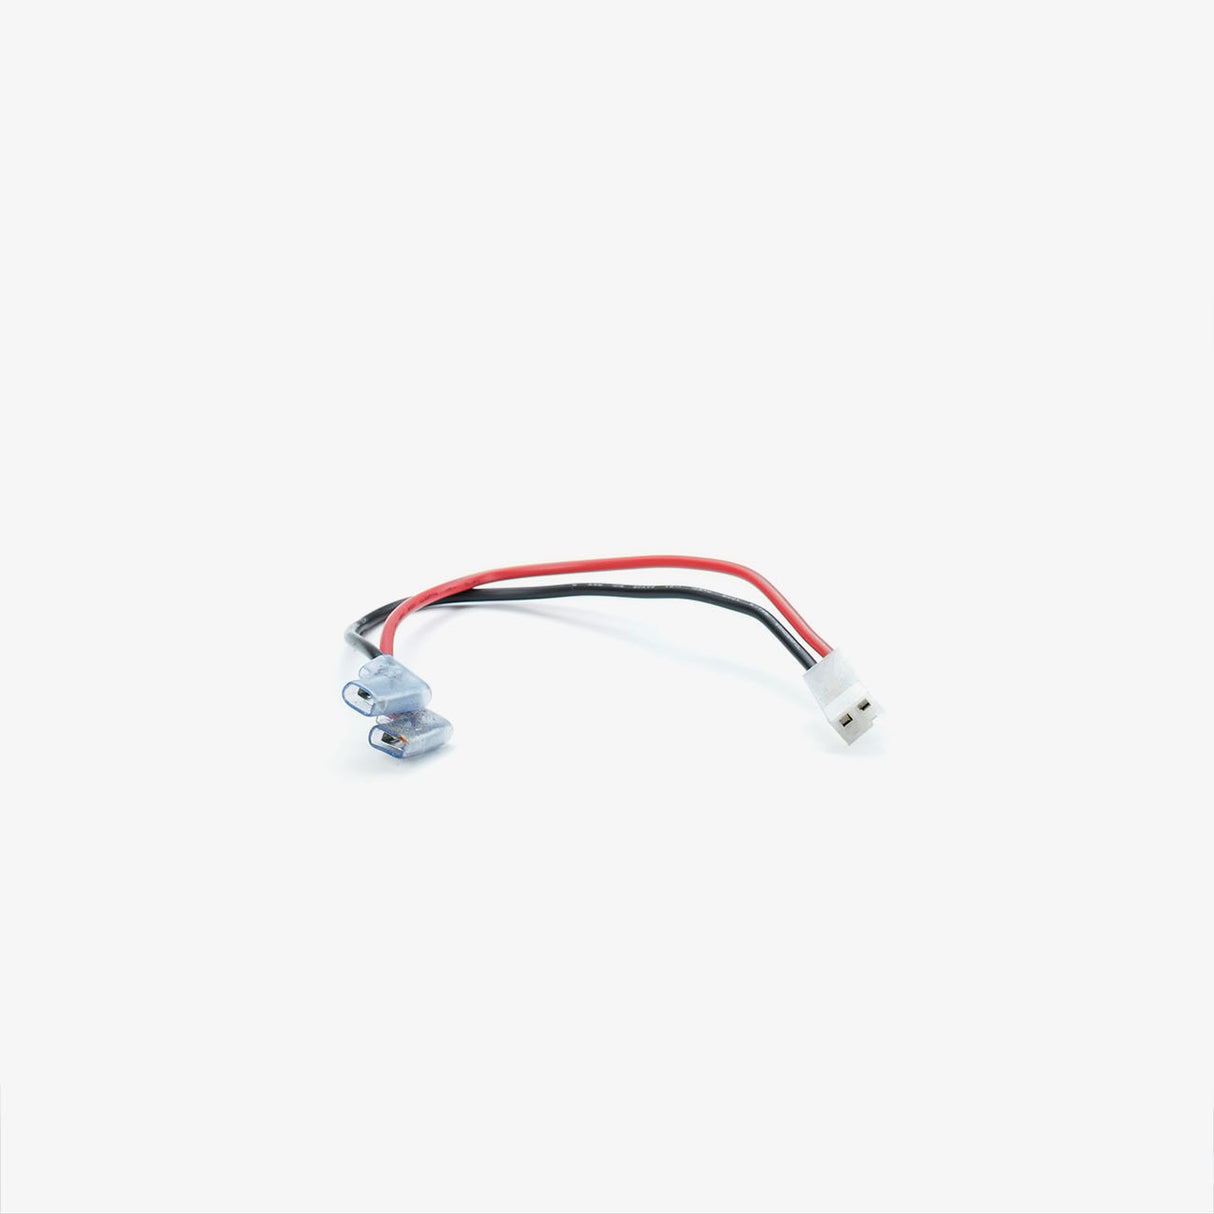 Motor Cable – Red & Black